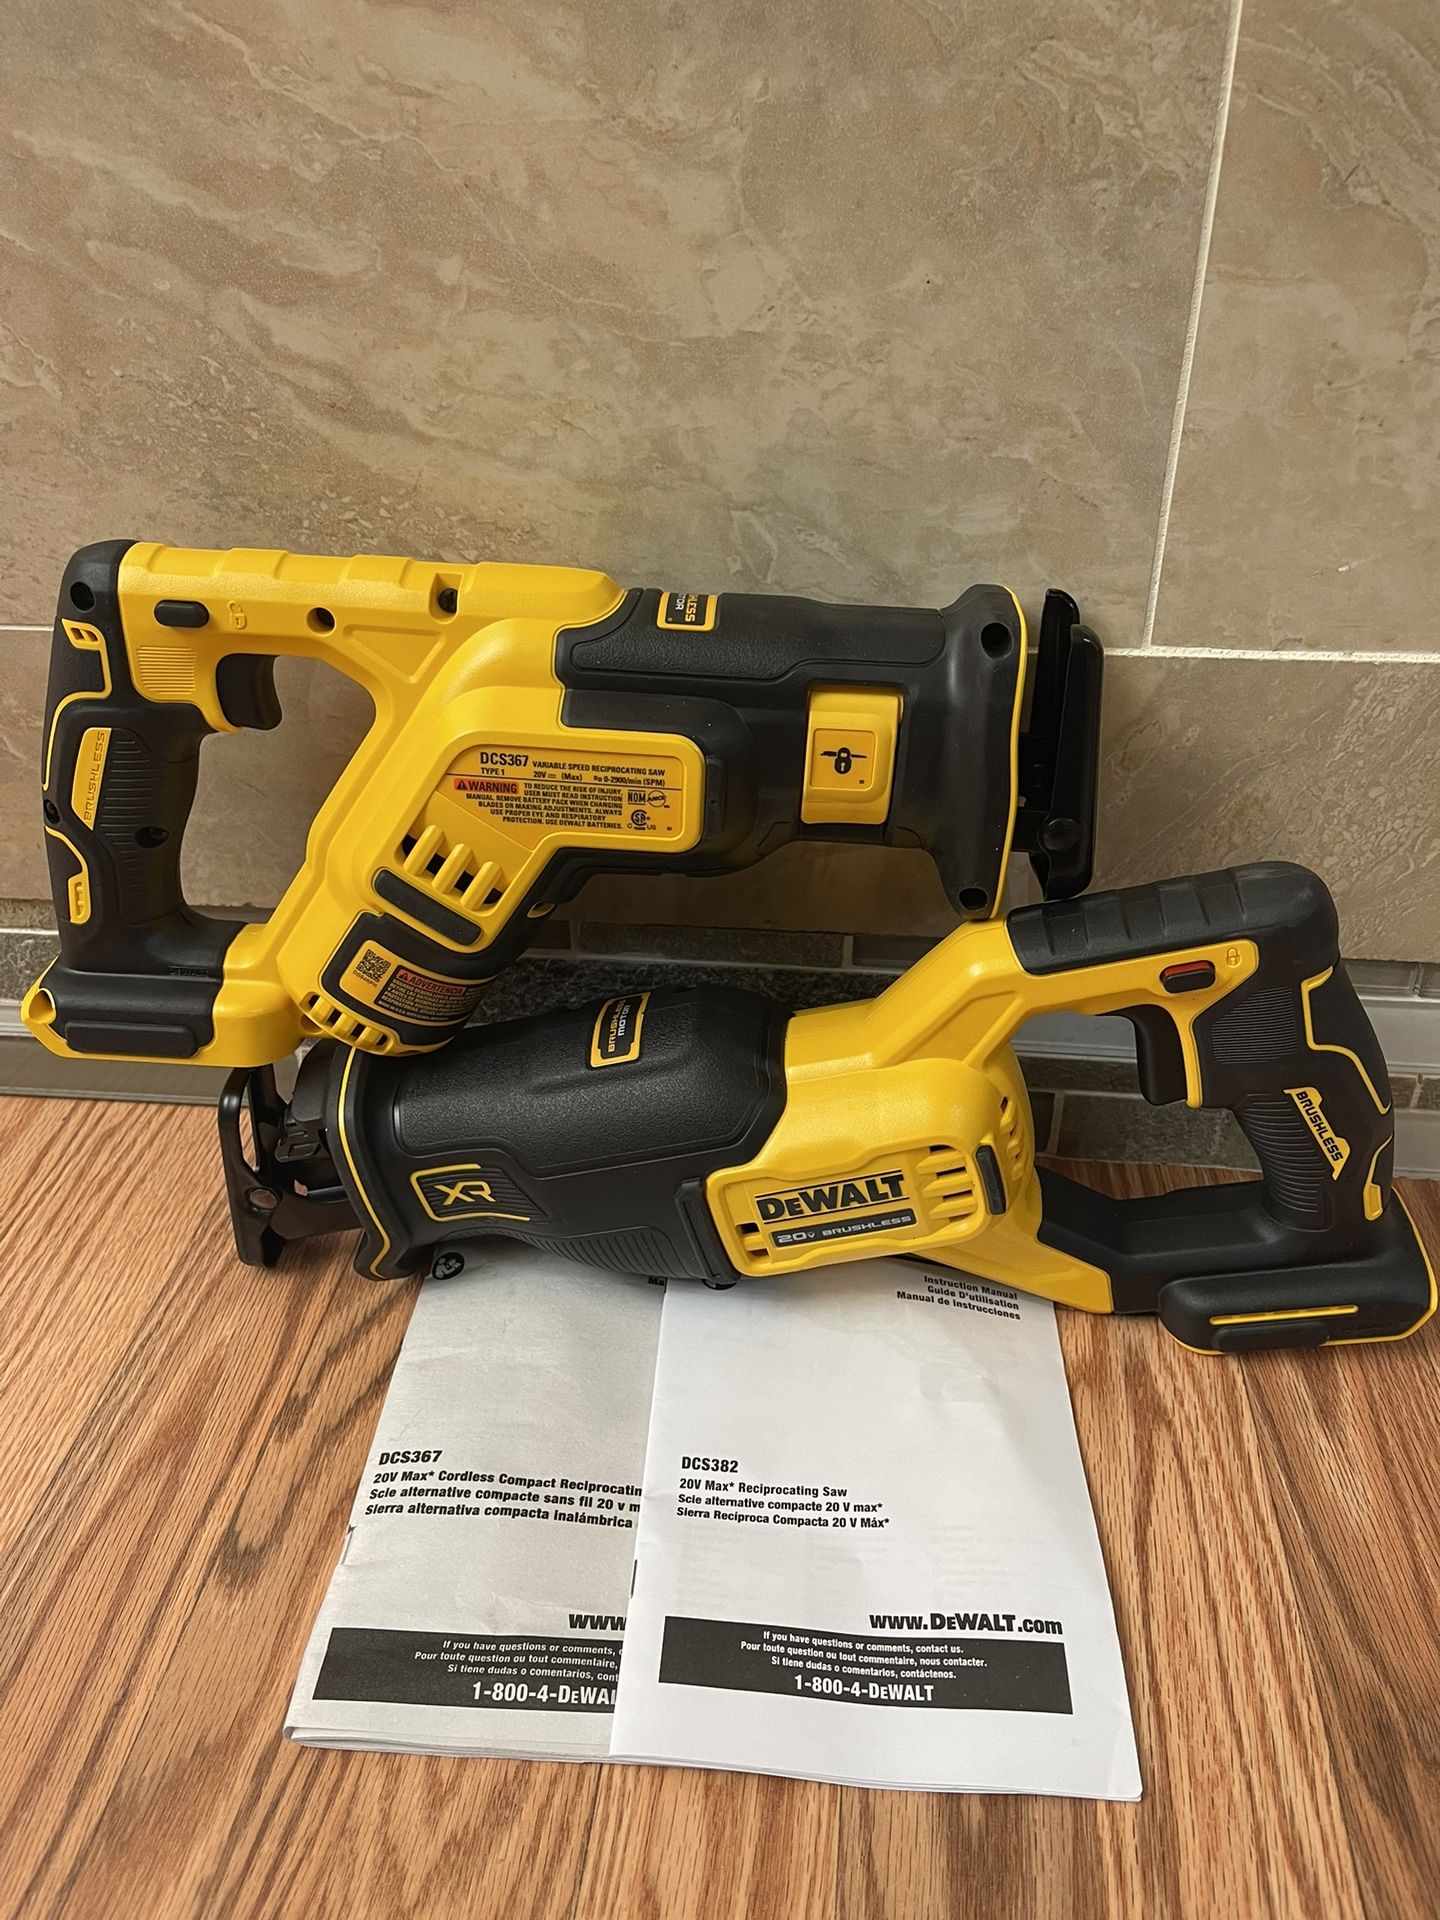 -DeWalt 20V 20Volt MAX XR Cordless Brushless Reciprocating Saw (Tool-Only).  Model DCS382. for Sale in Portland, OR OfferUp